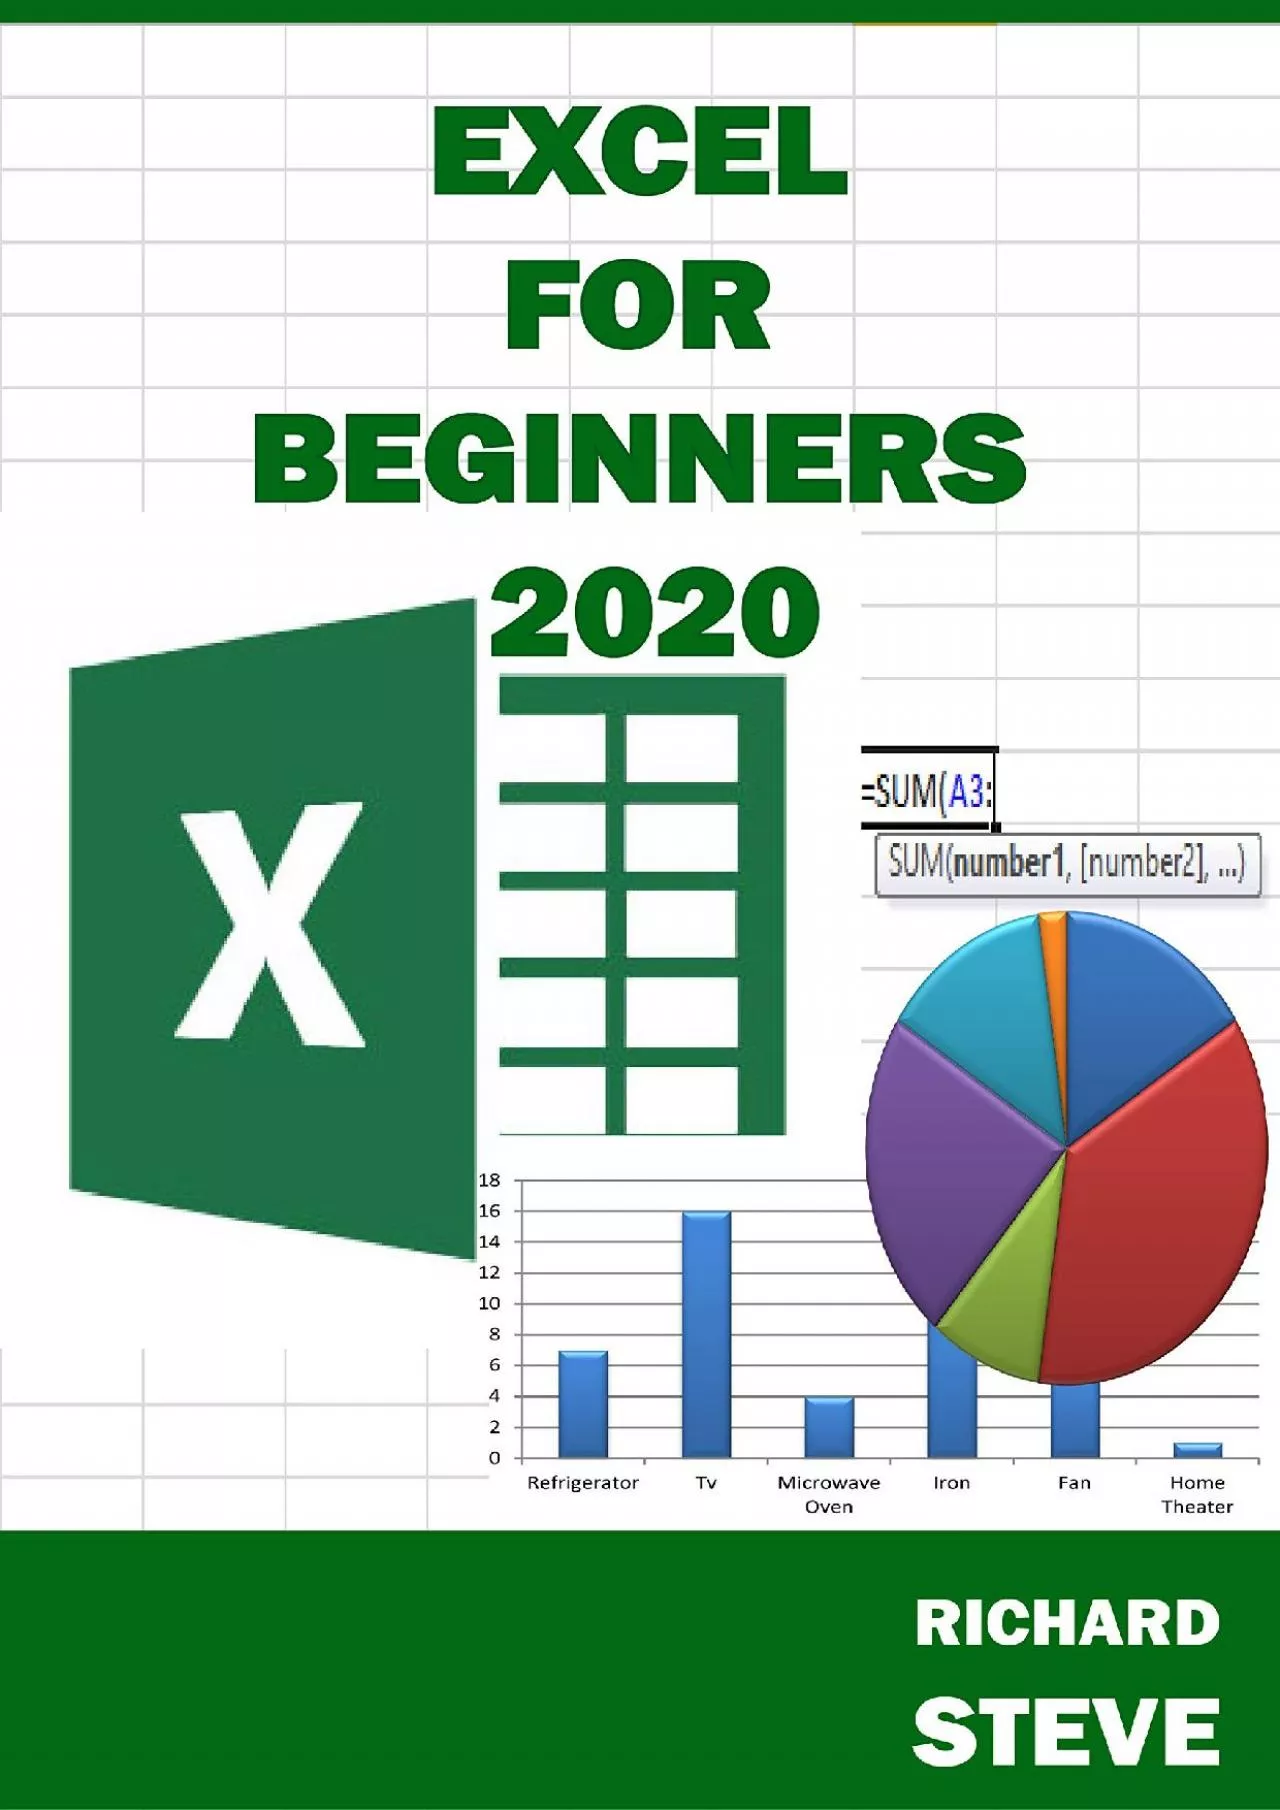 (BOOS)-EXCEL FOR BEGINNERS 2020: Beginners\' Guide To Excel || This Book Will Guide You